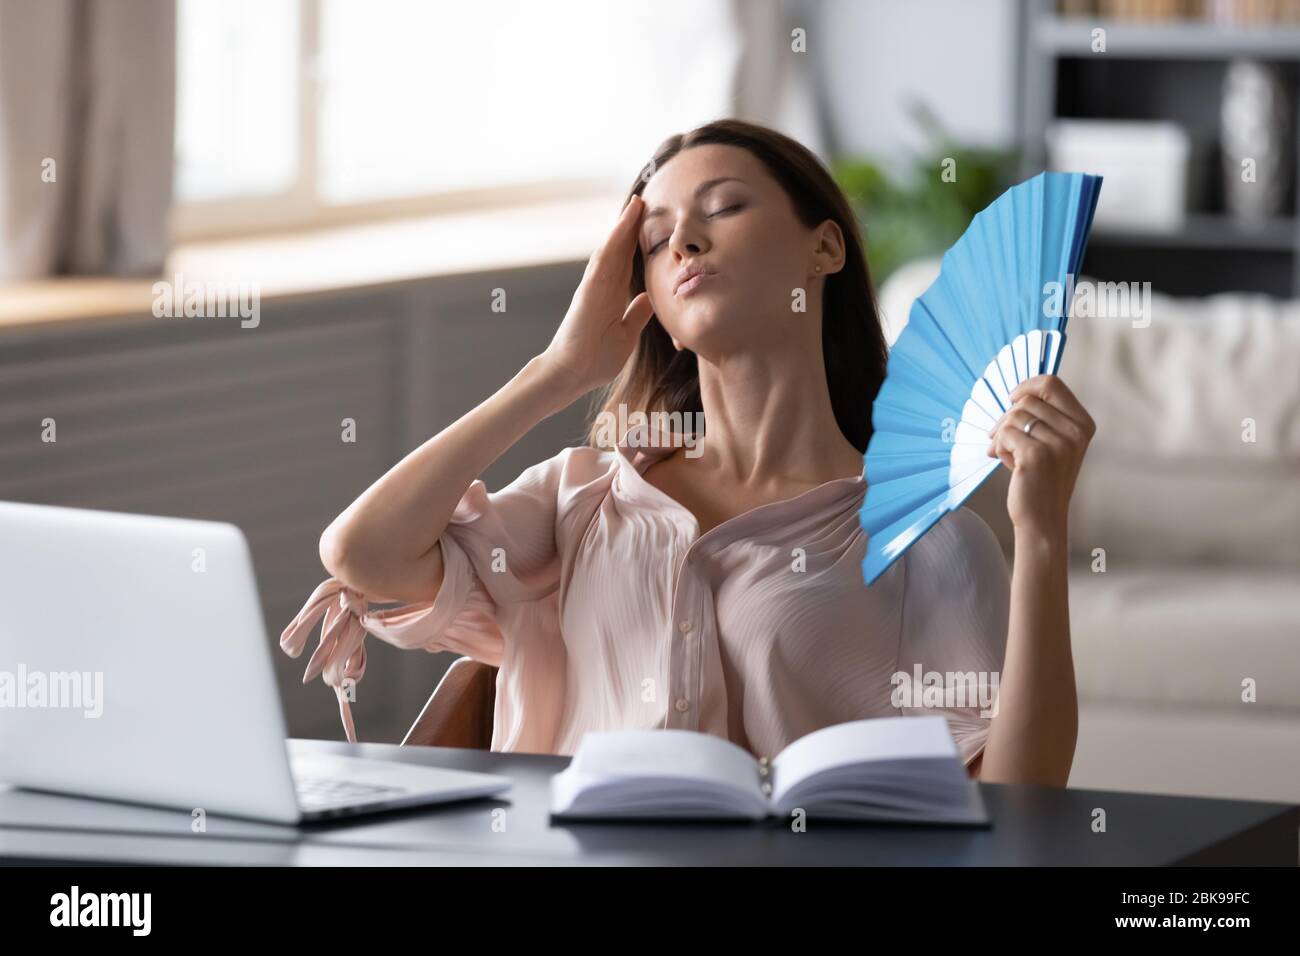 Overheated woman waving fan, touching forehead, suffering from heating Stock Photo